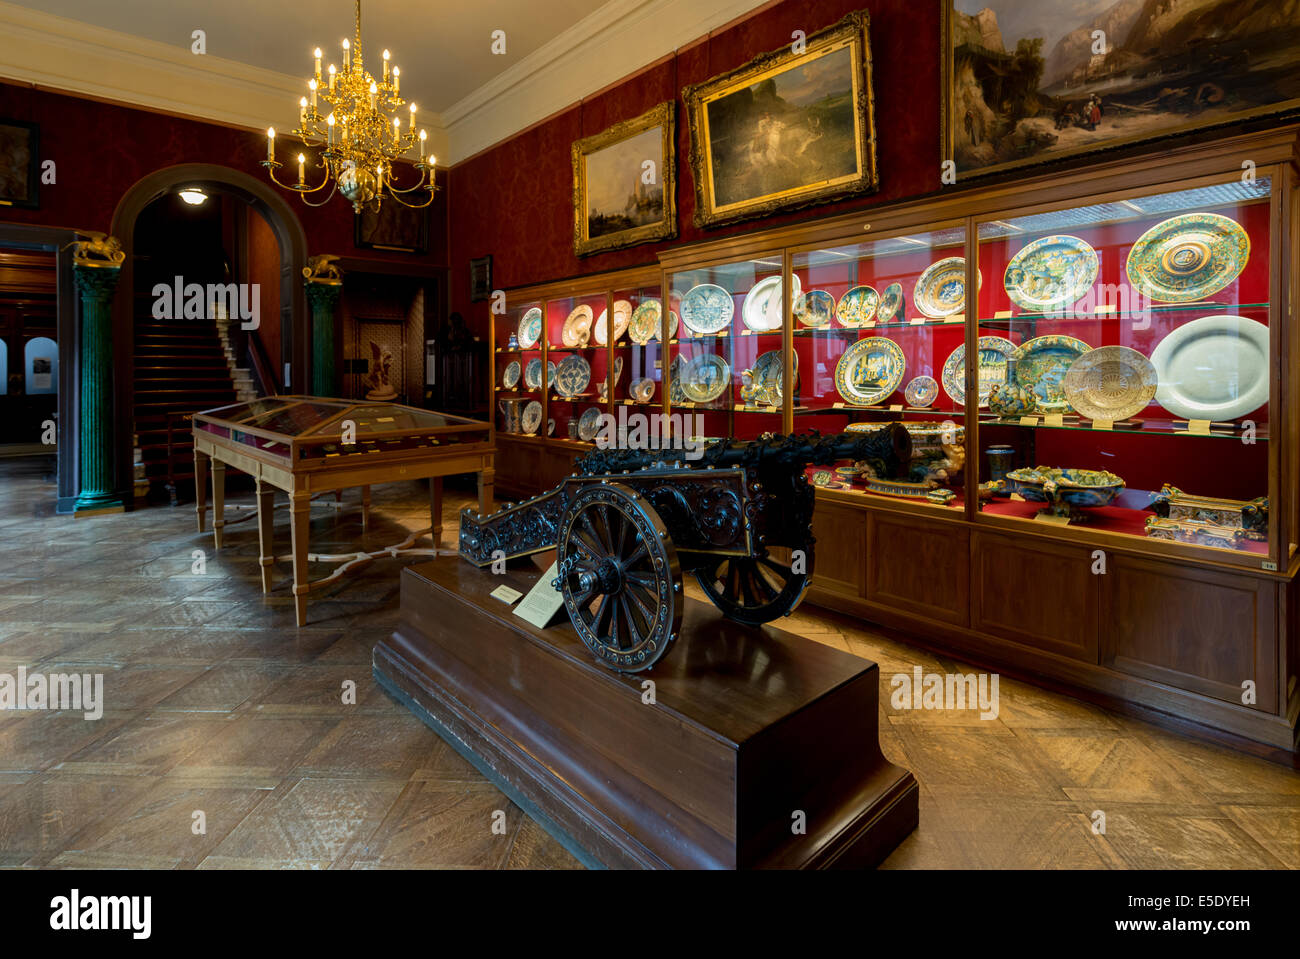 A cannon in The Wallace Collection. The Wallace Collection is a national museum in an historic London town house. Stock Photo